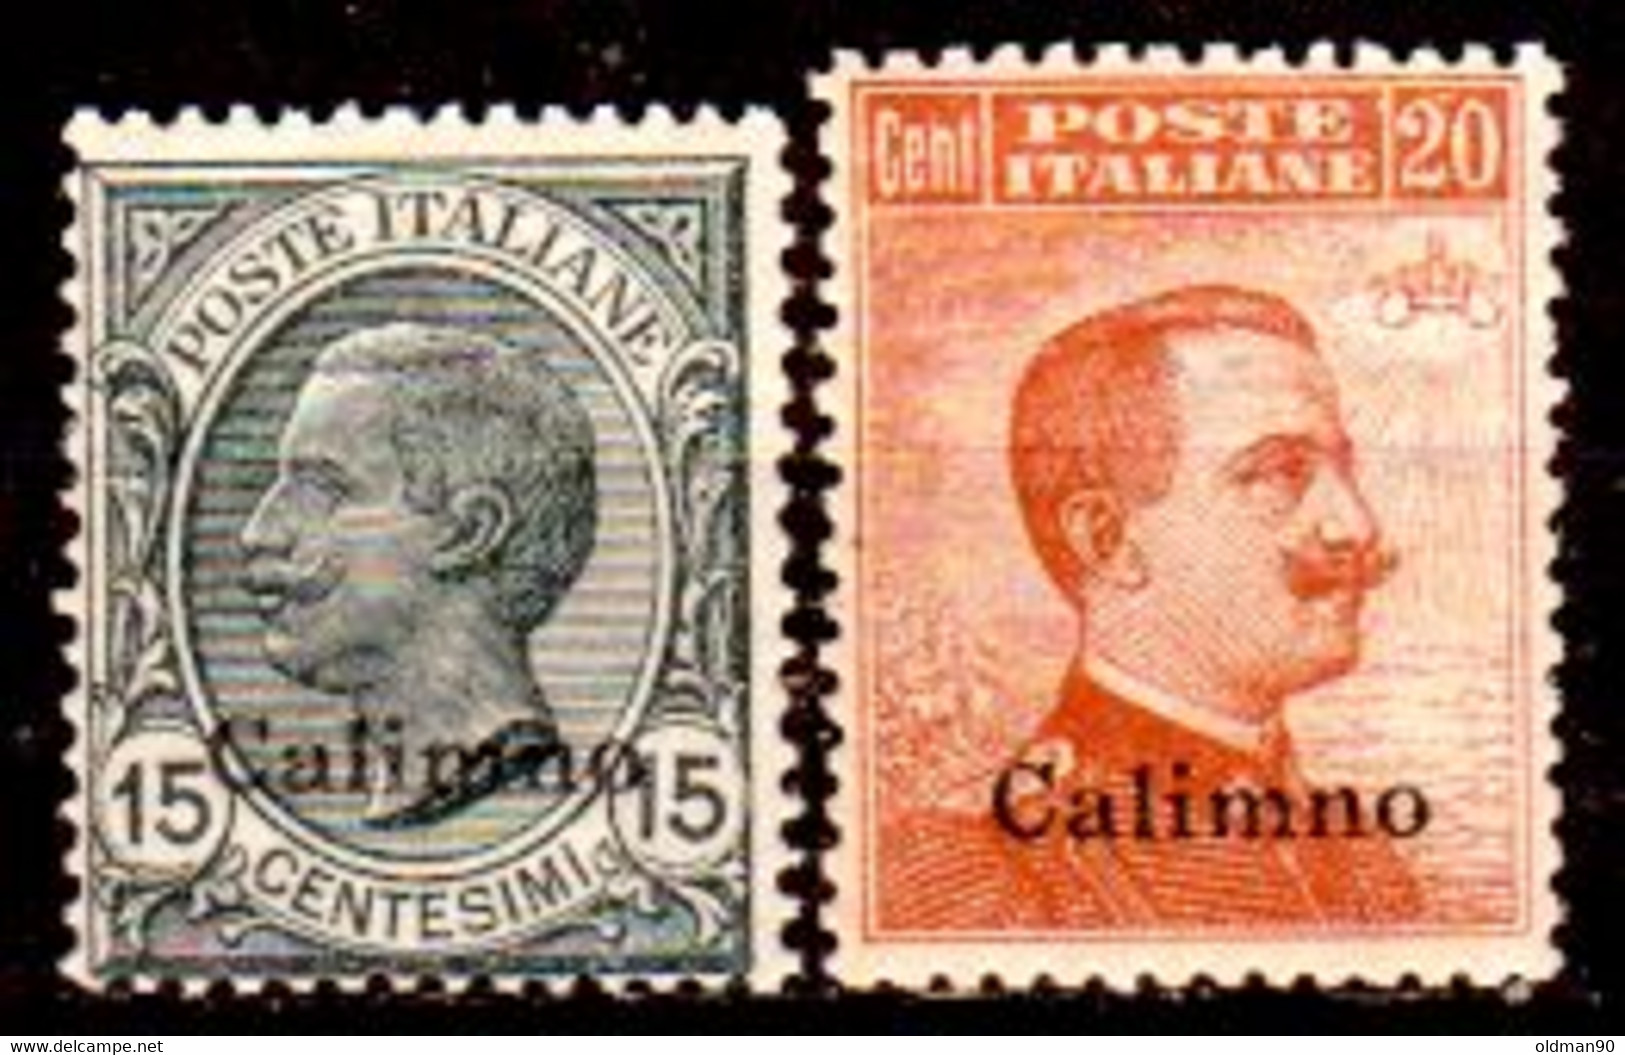 Egeo-OS-265- Calino: Original Stamp And Overprint 1921-22 (++) MNH - Crown Watermark - Quality In Your Opinion. - Aegean (Calino)